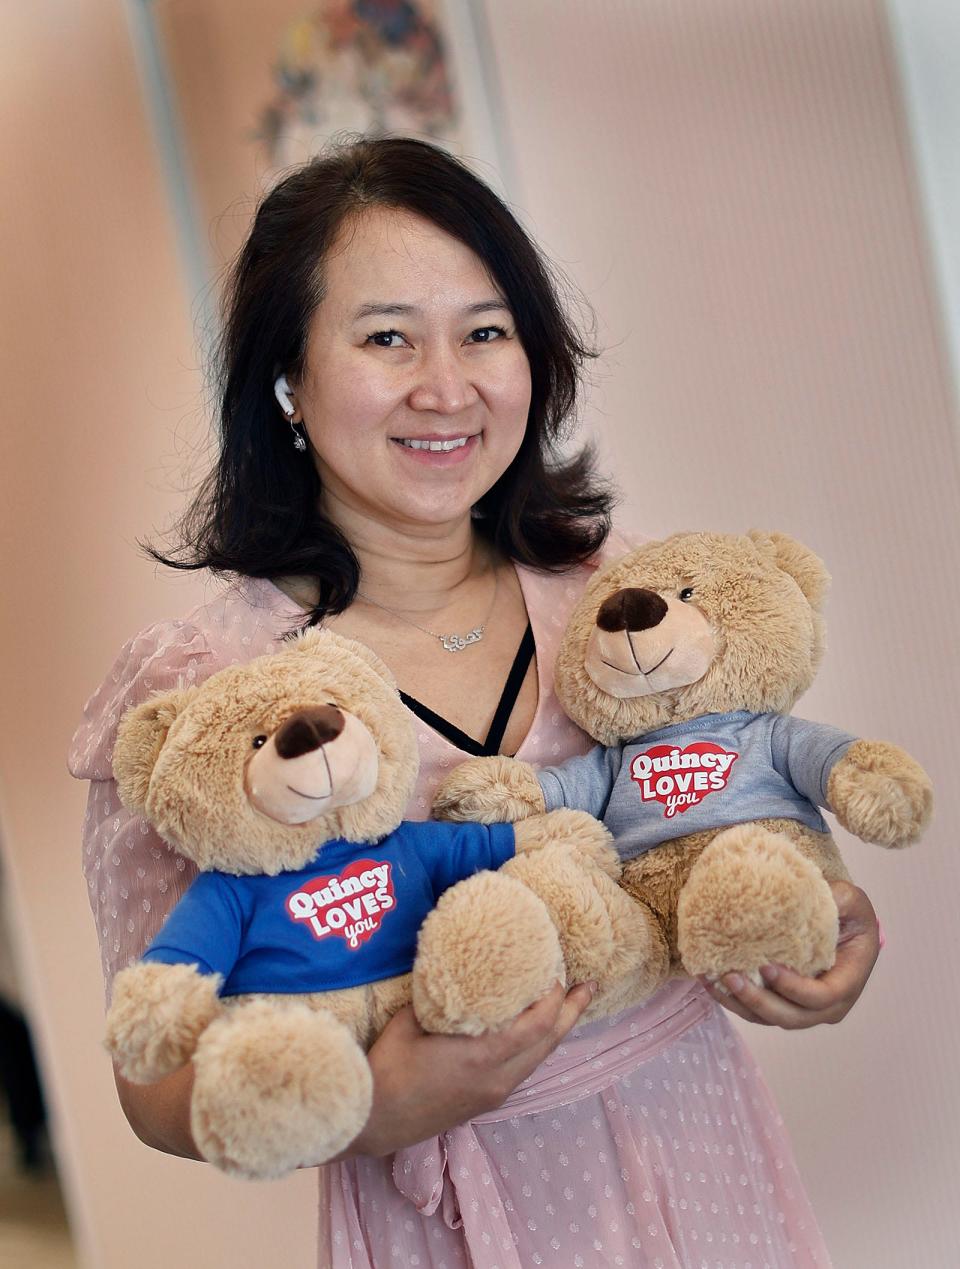 Thuy Leung of Quincy came to the United States as a child refugee from Vietnam. She has created a 'Quincy Loves You' bear for refugee children passing through the temporary shelter at Eastern Nazarene College.